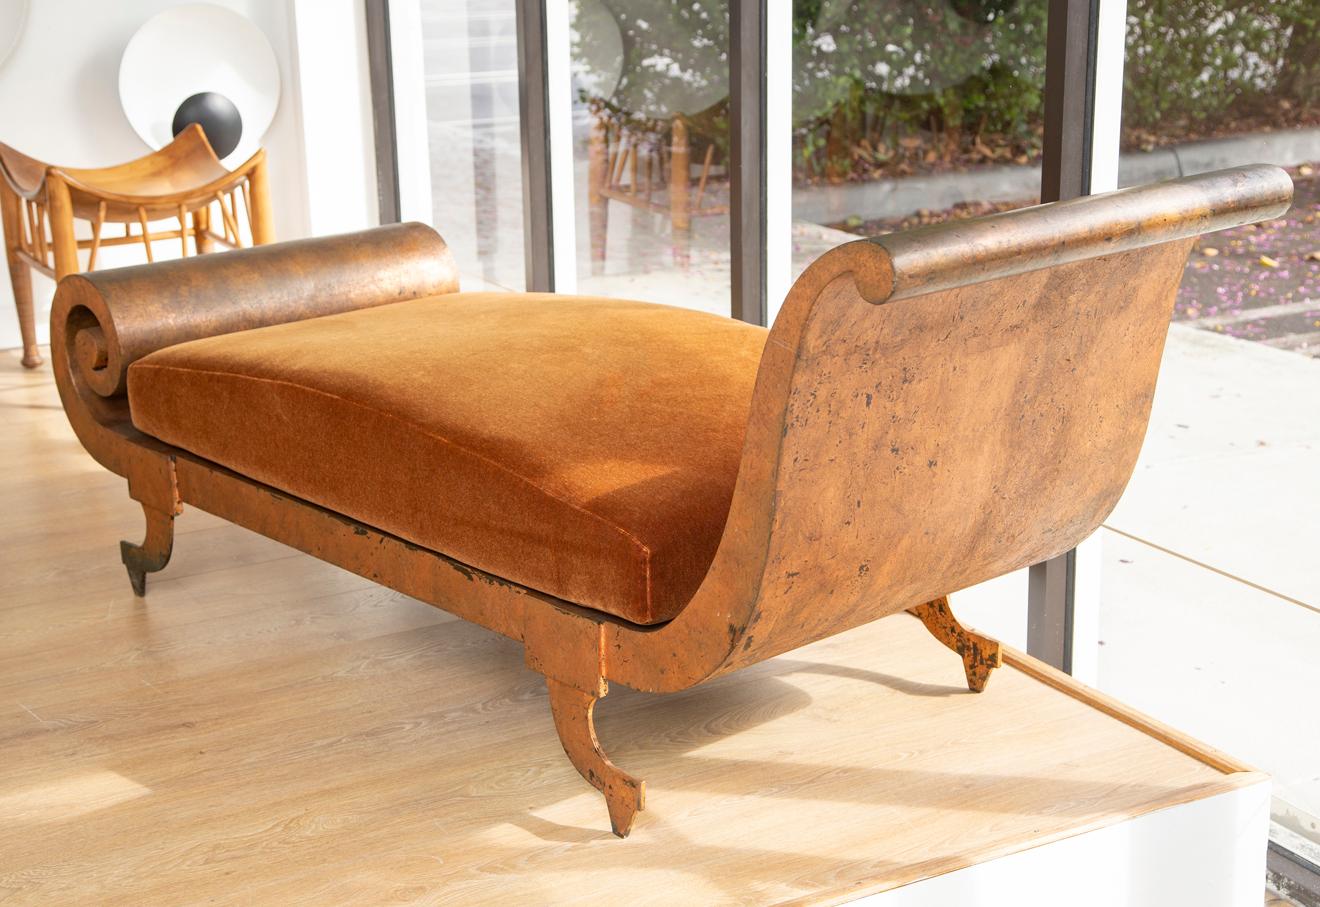 Neoclassical style metal daybed with copper patina by Lyle and Umbach
USA circa 1980
Features one curved end and another end terminating in a scroll
We love the distressed copper/metal patina
Original uphostery in copper mohair (from previous